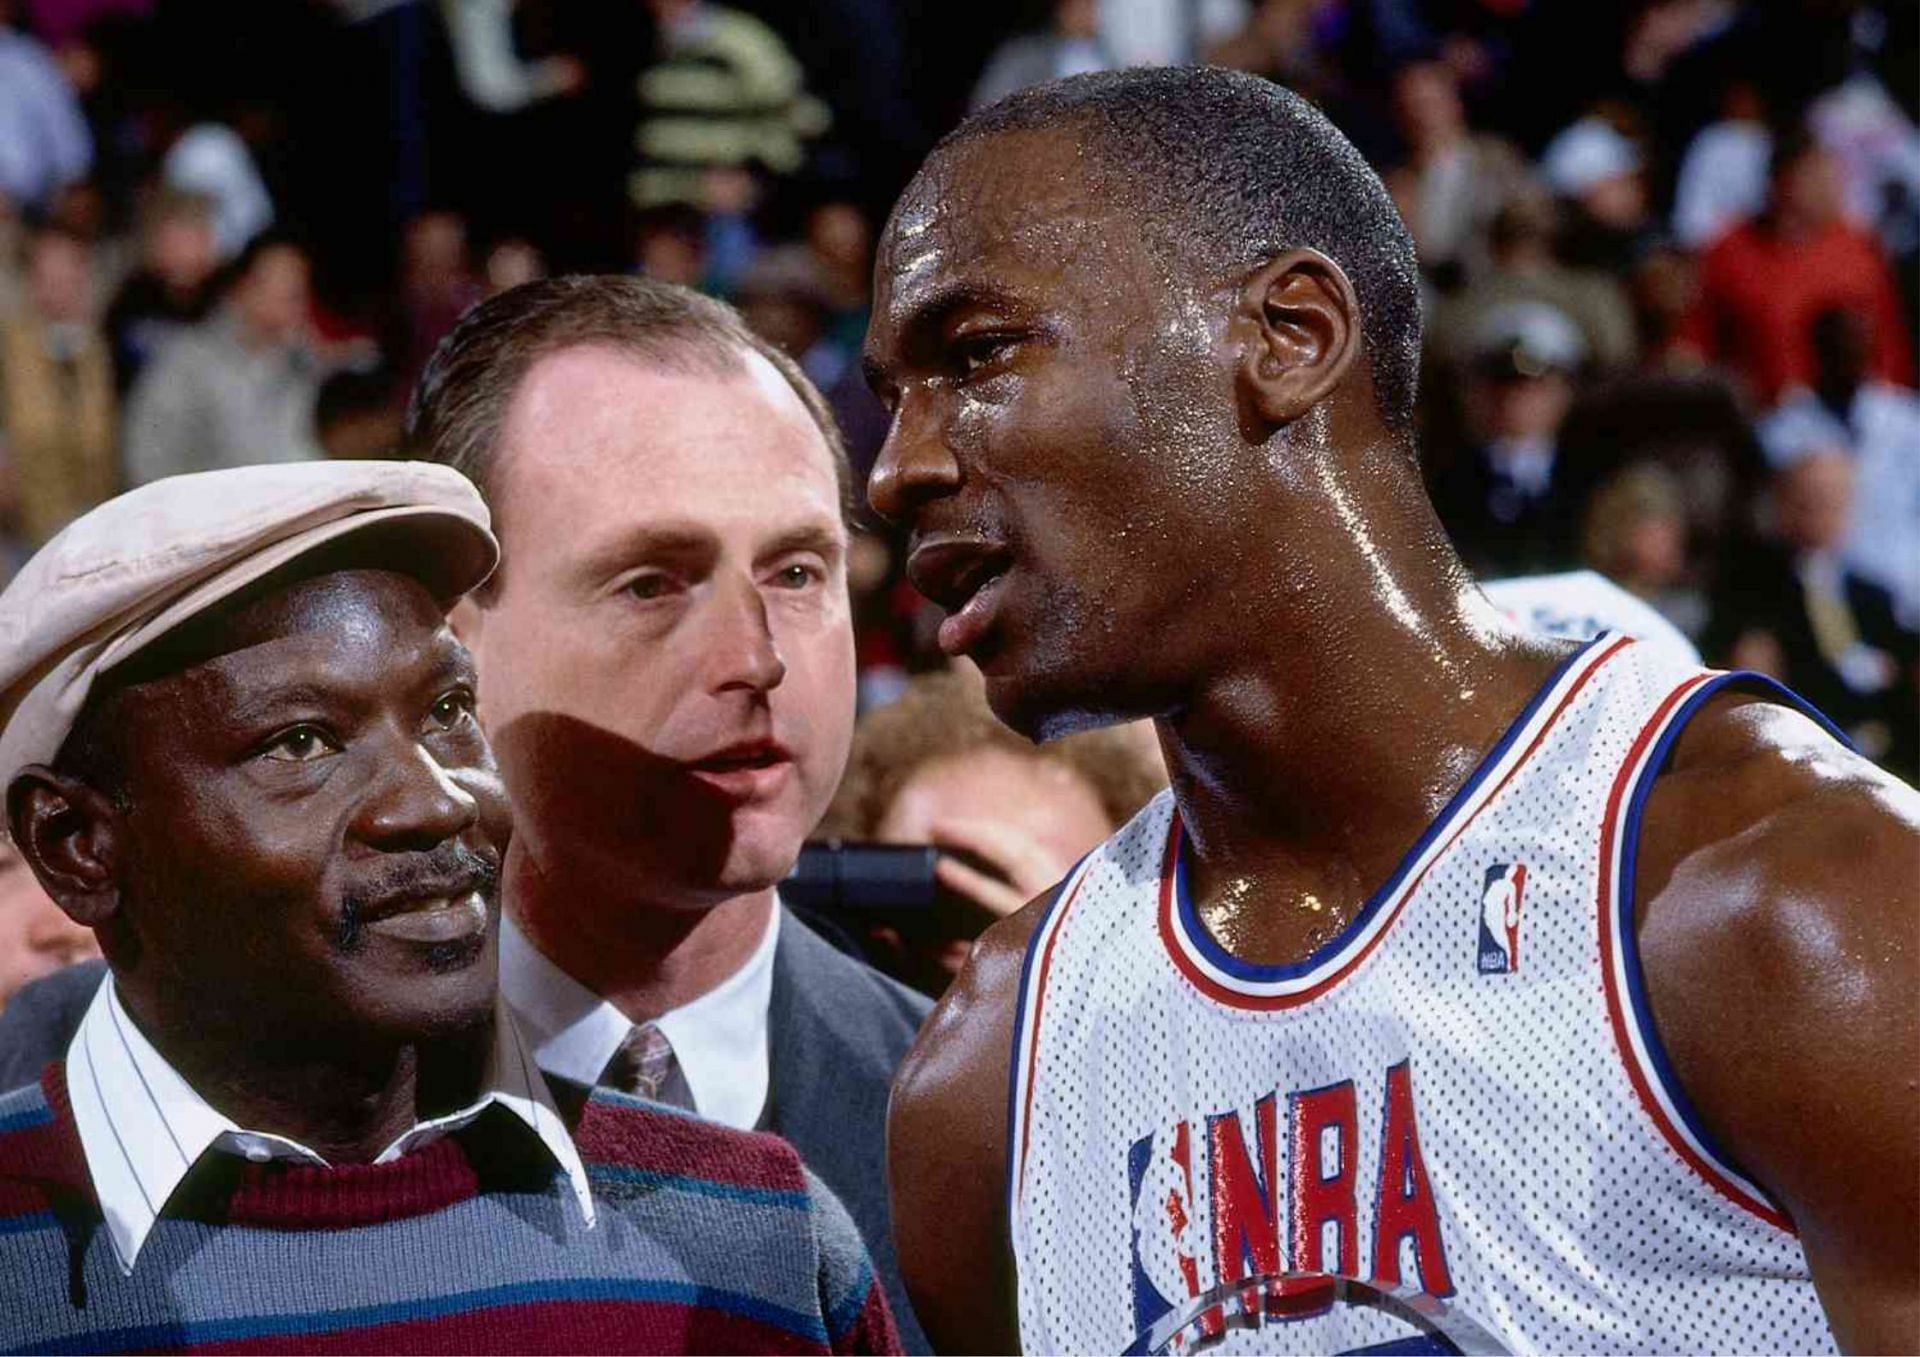 Michael Jordan briefly retired from the NBA after the murder of his father, James Jordan.